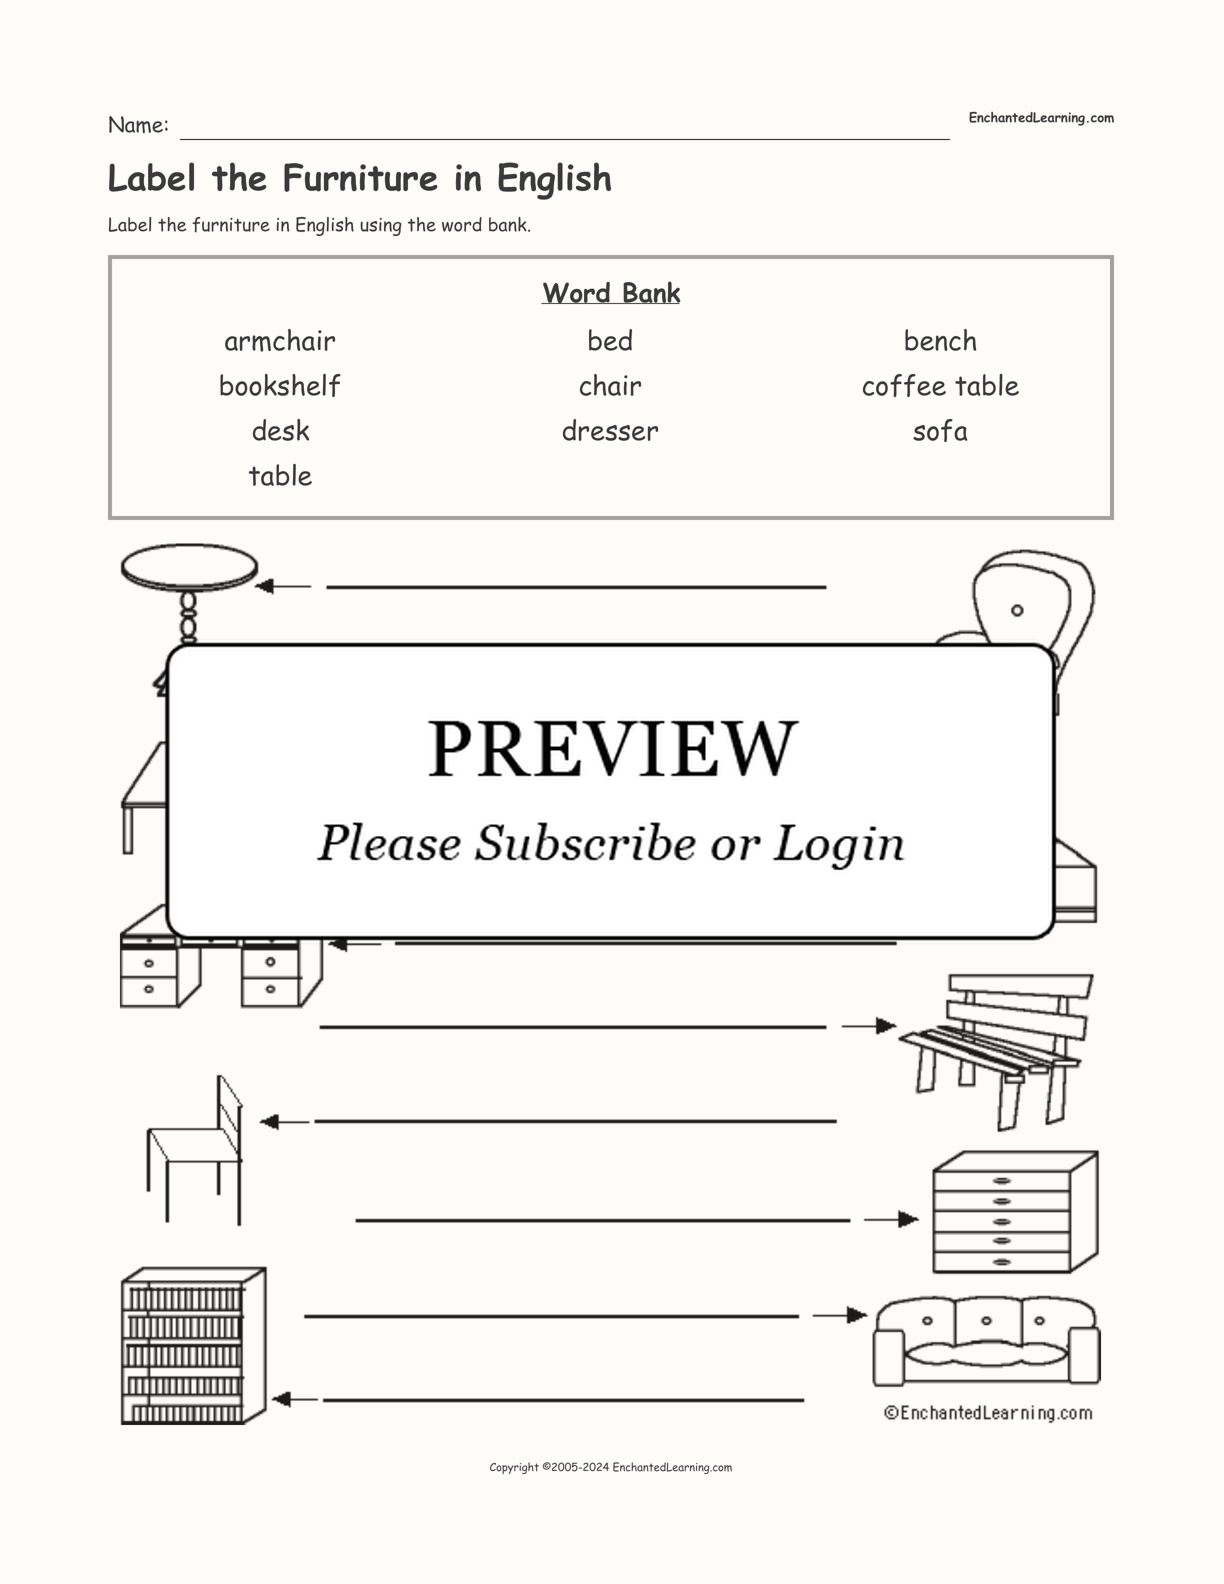 Label the Furniture in English interactive worksheet page 1